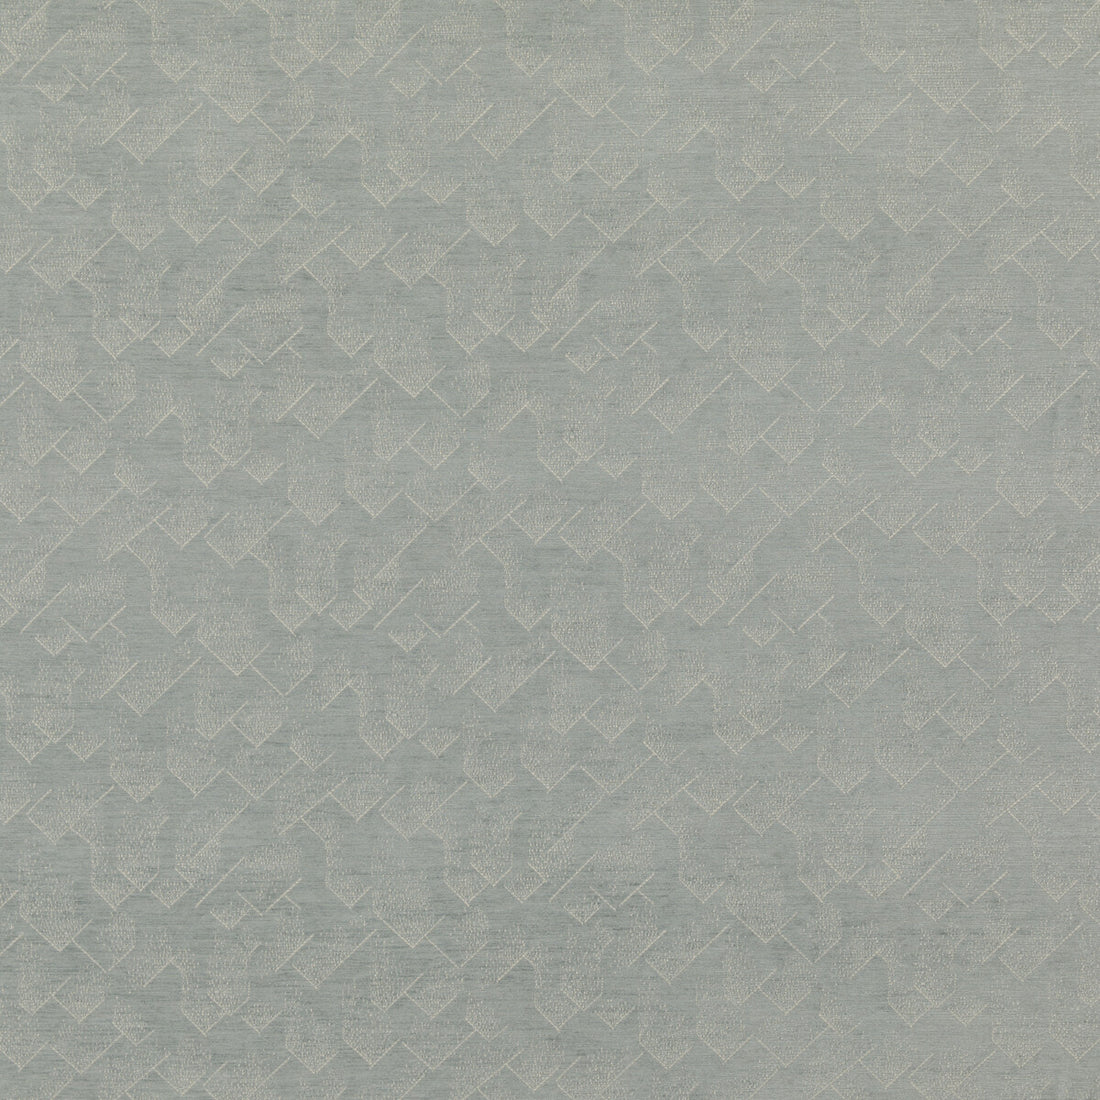 Brink fabric in water/ivory color - pattern GWF-3733.131.0 - by Lee Jofa Modern in the Kelly Wearstler IV collection